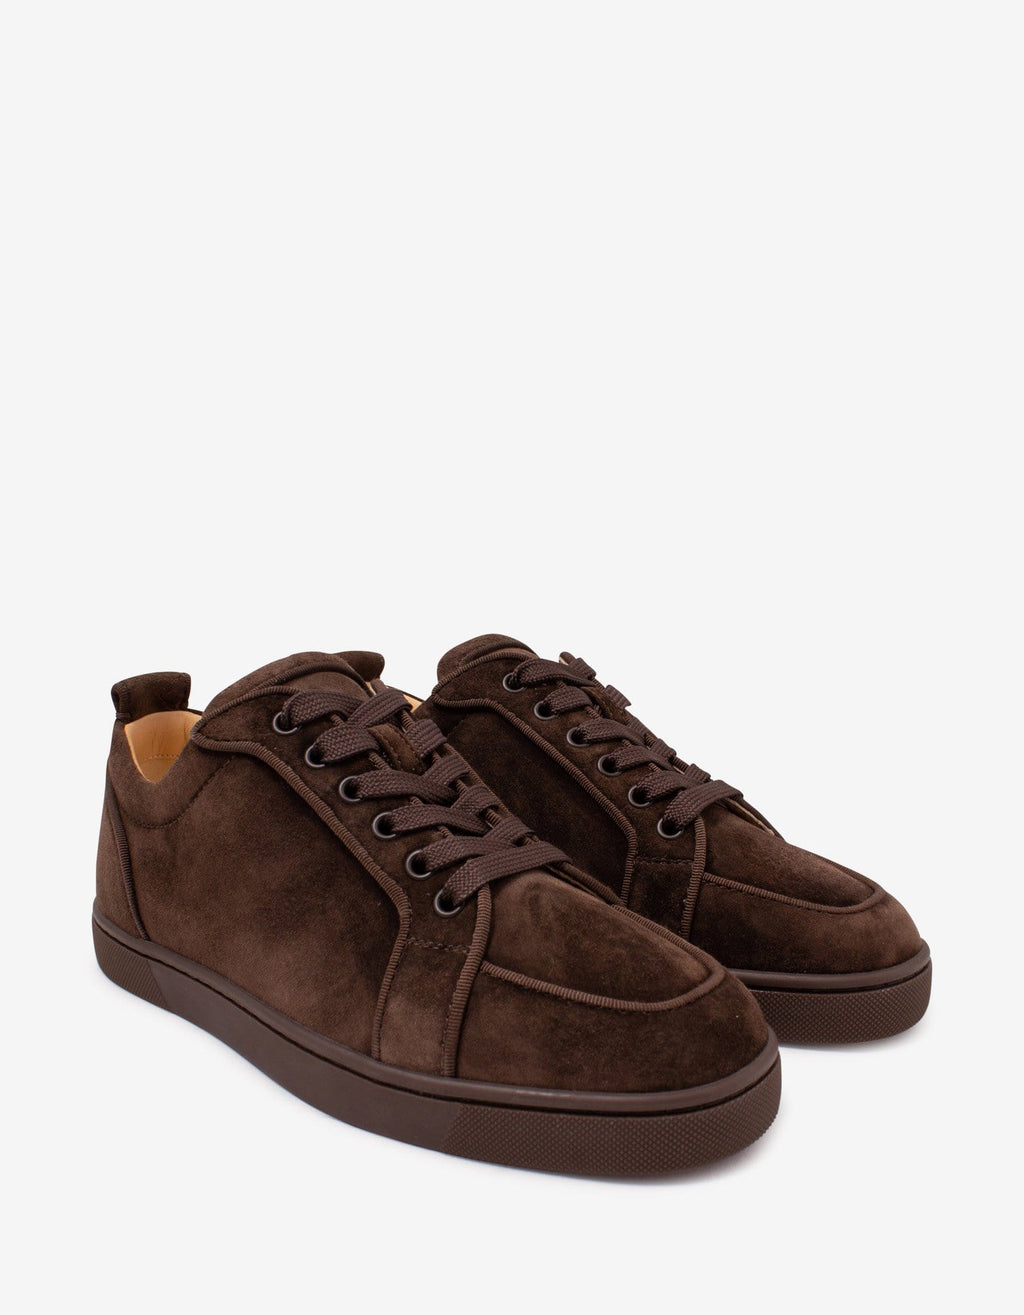 Christian Louboutin Christian Louboutin Rantulow Orlato Brown Suede Leather Trainers